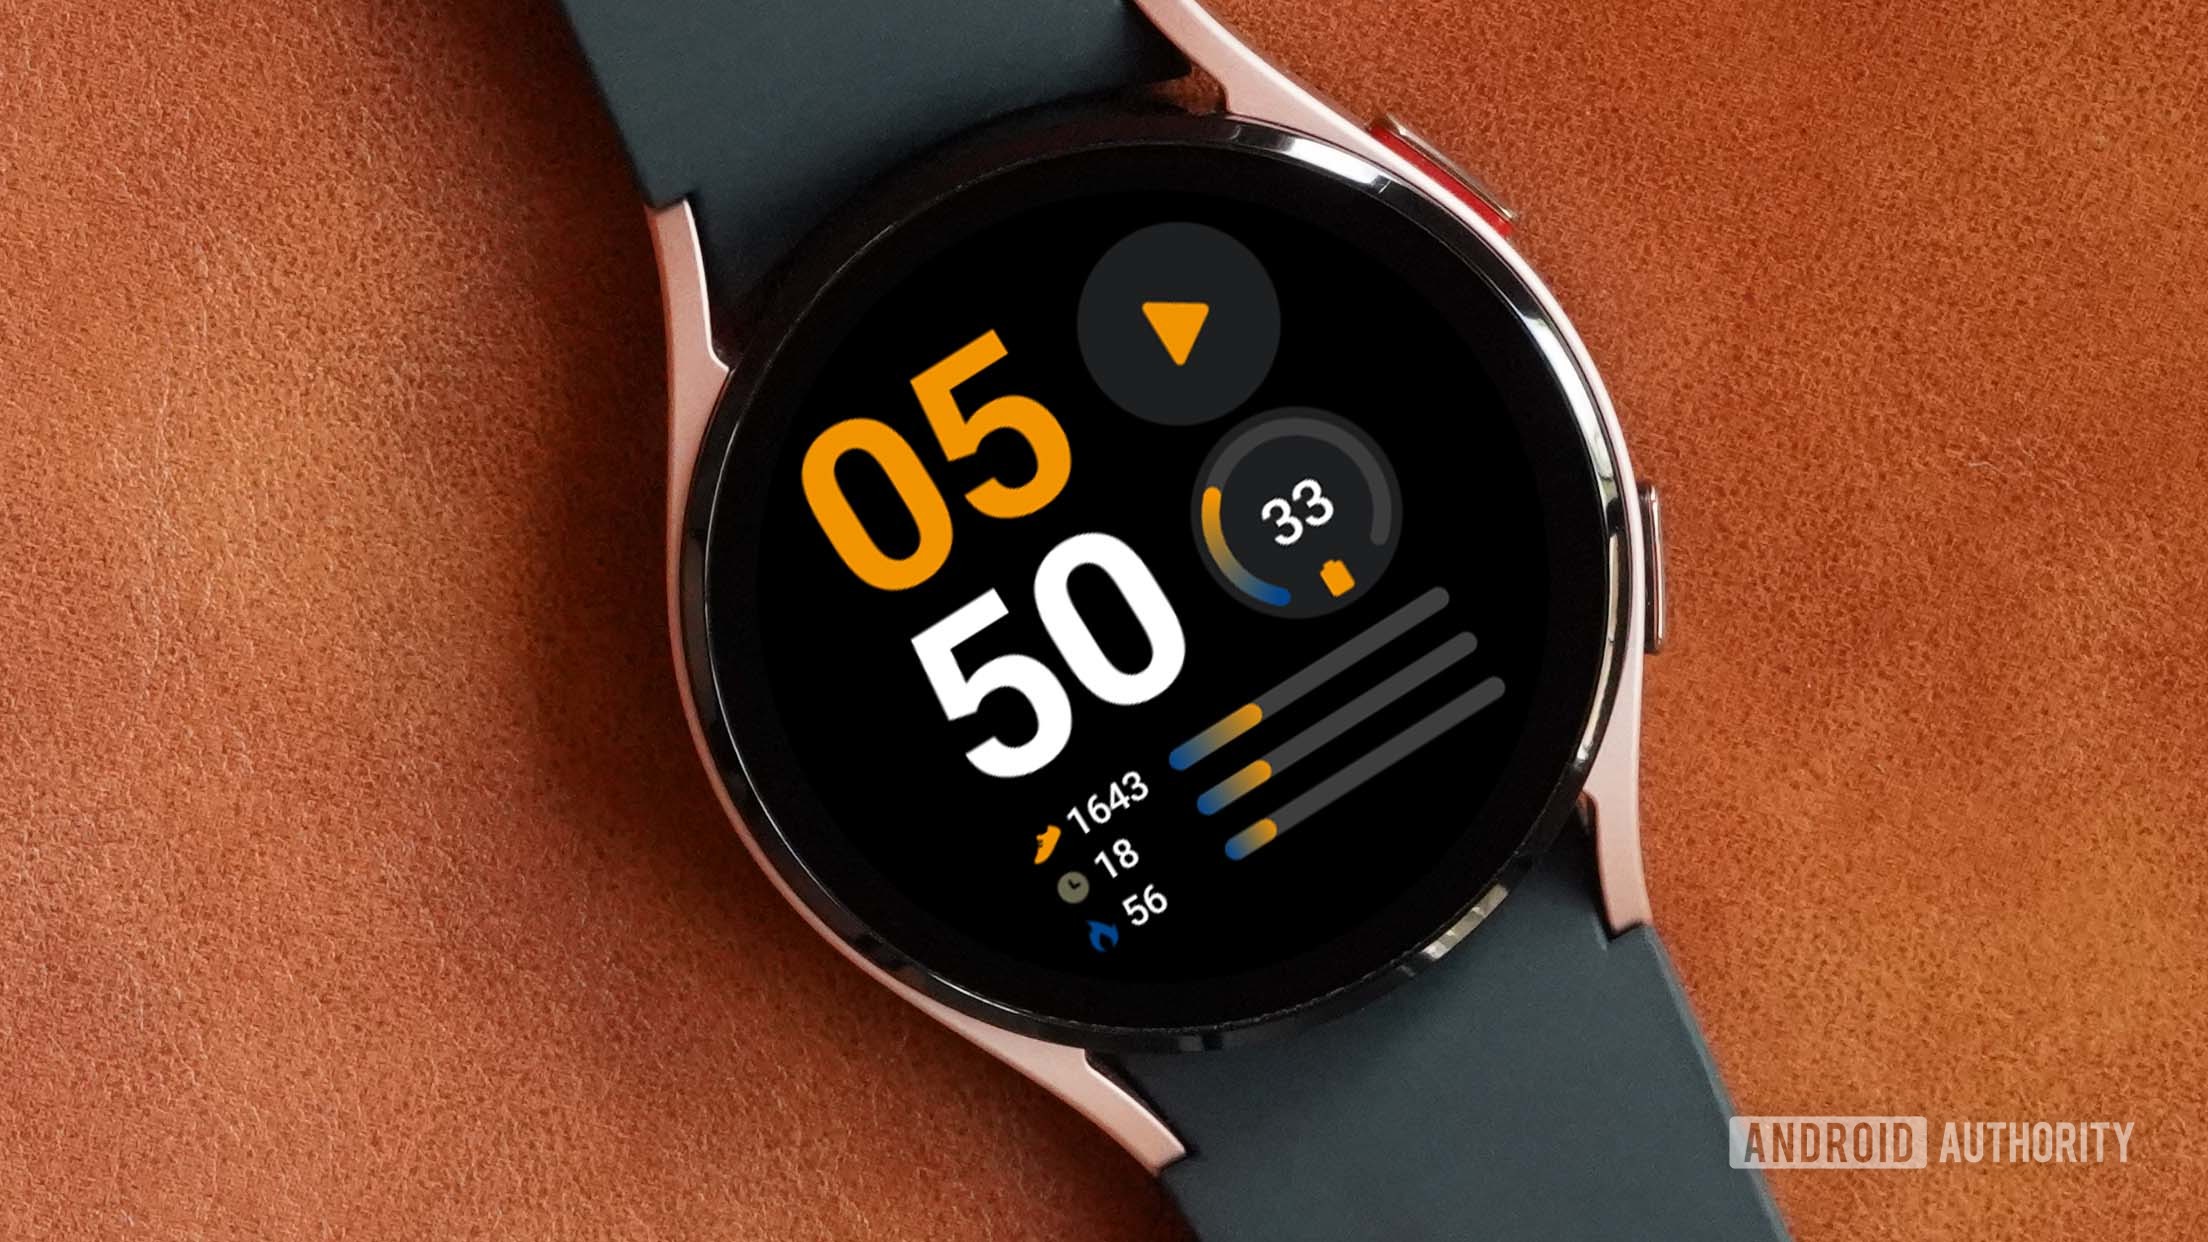 A samsung galaxy watch 4 on a leather surface displays the watch face info brick.